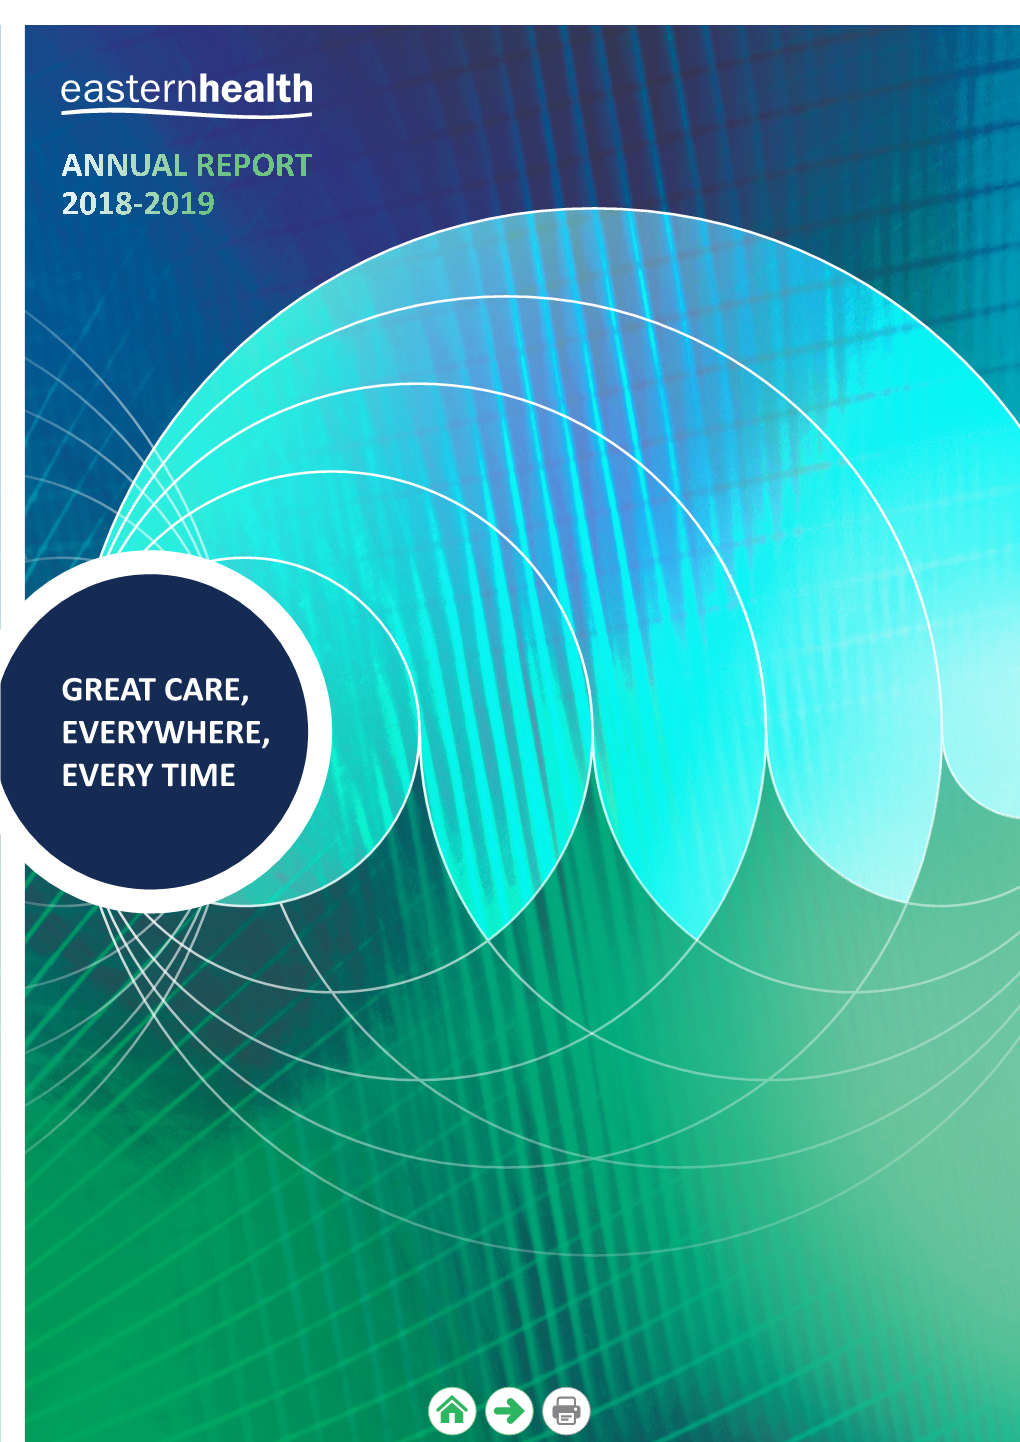 Annual Report 2018-2019 Great Care, Everywhere